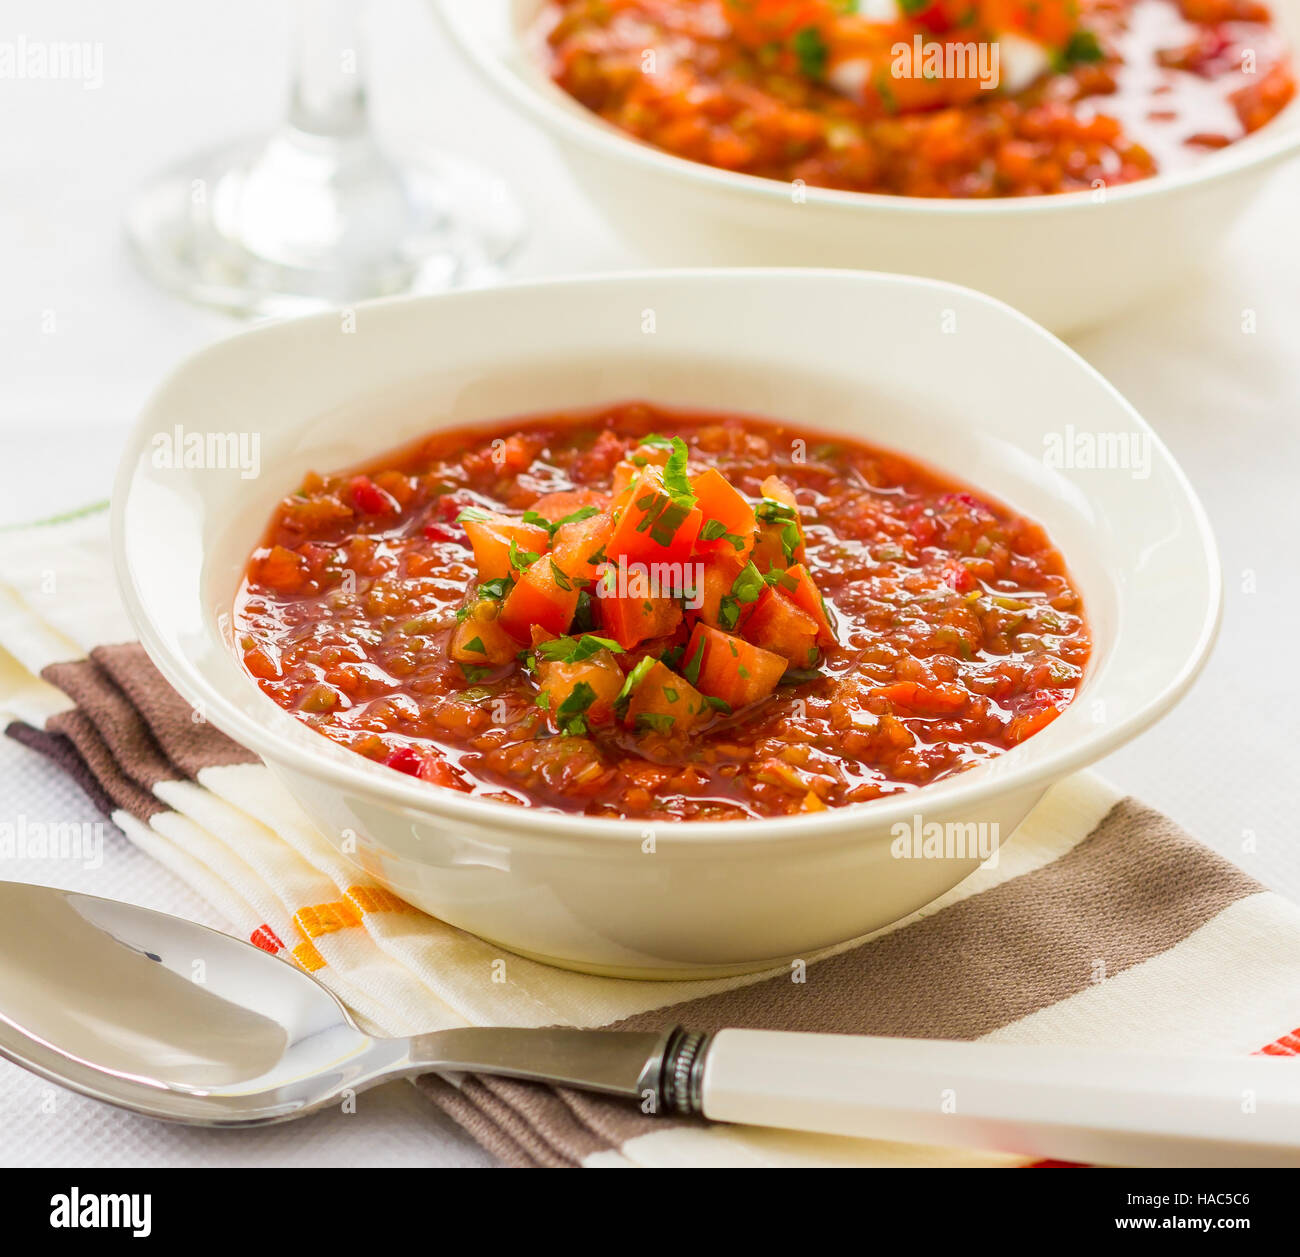 Traditional vegetable borscht from Ukraine and Russia. Stock Photo